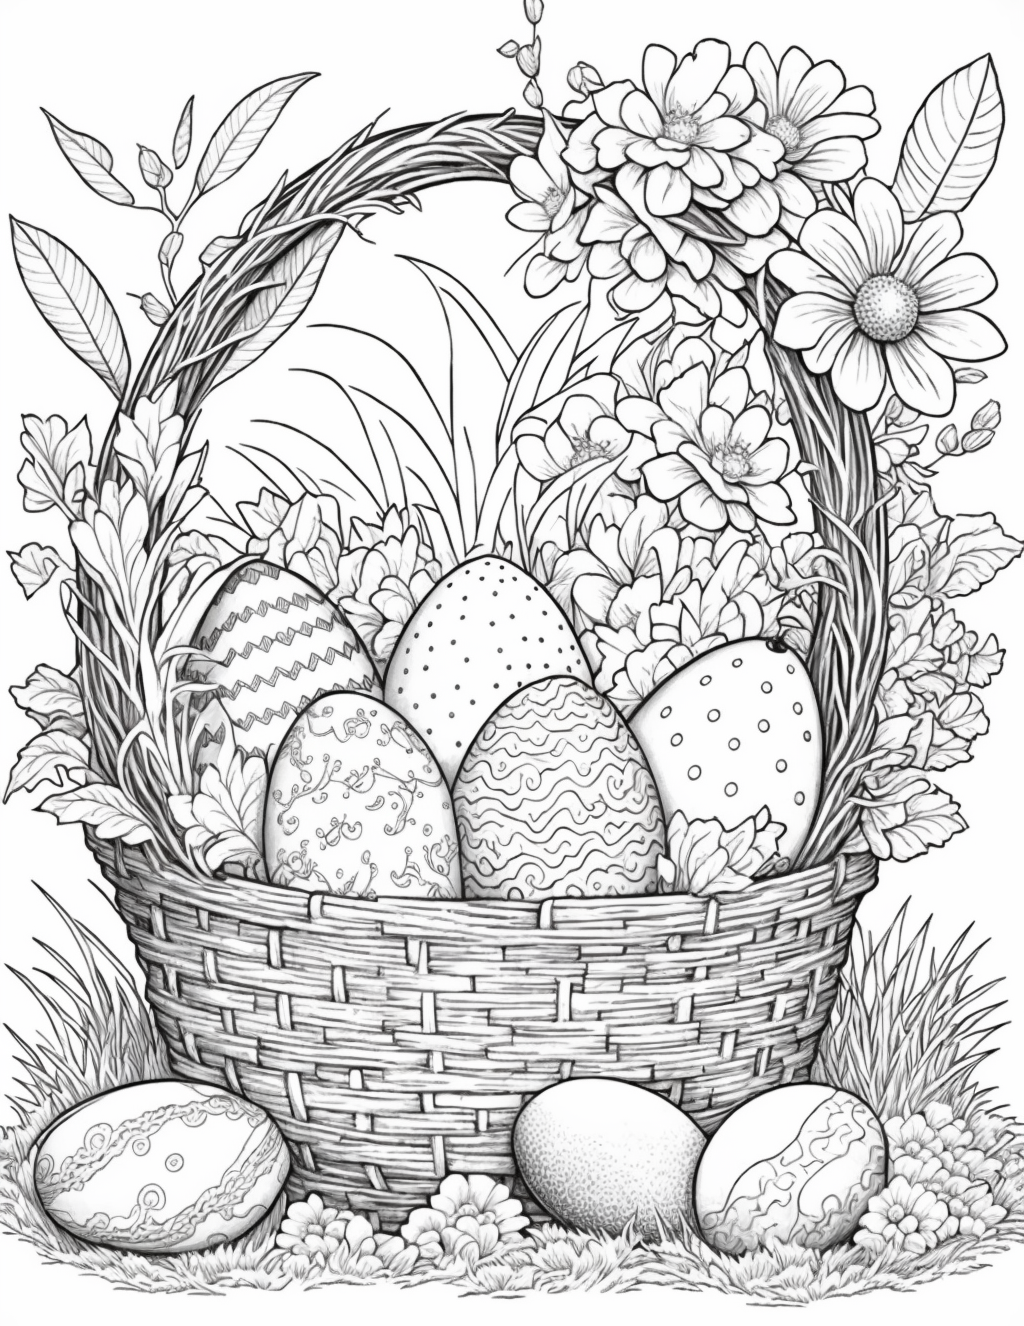 Easter Coloring Book for Adults